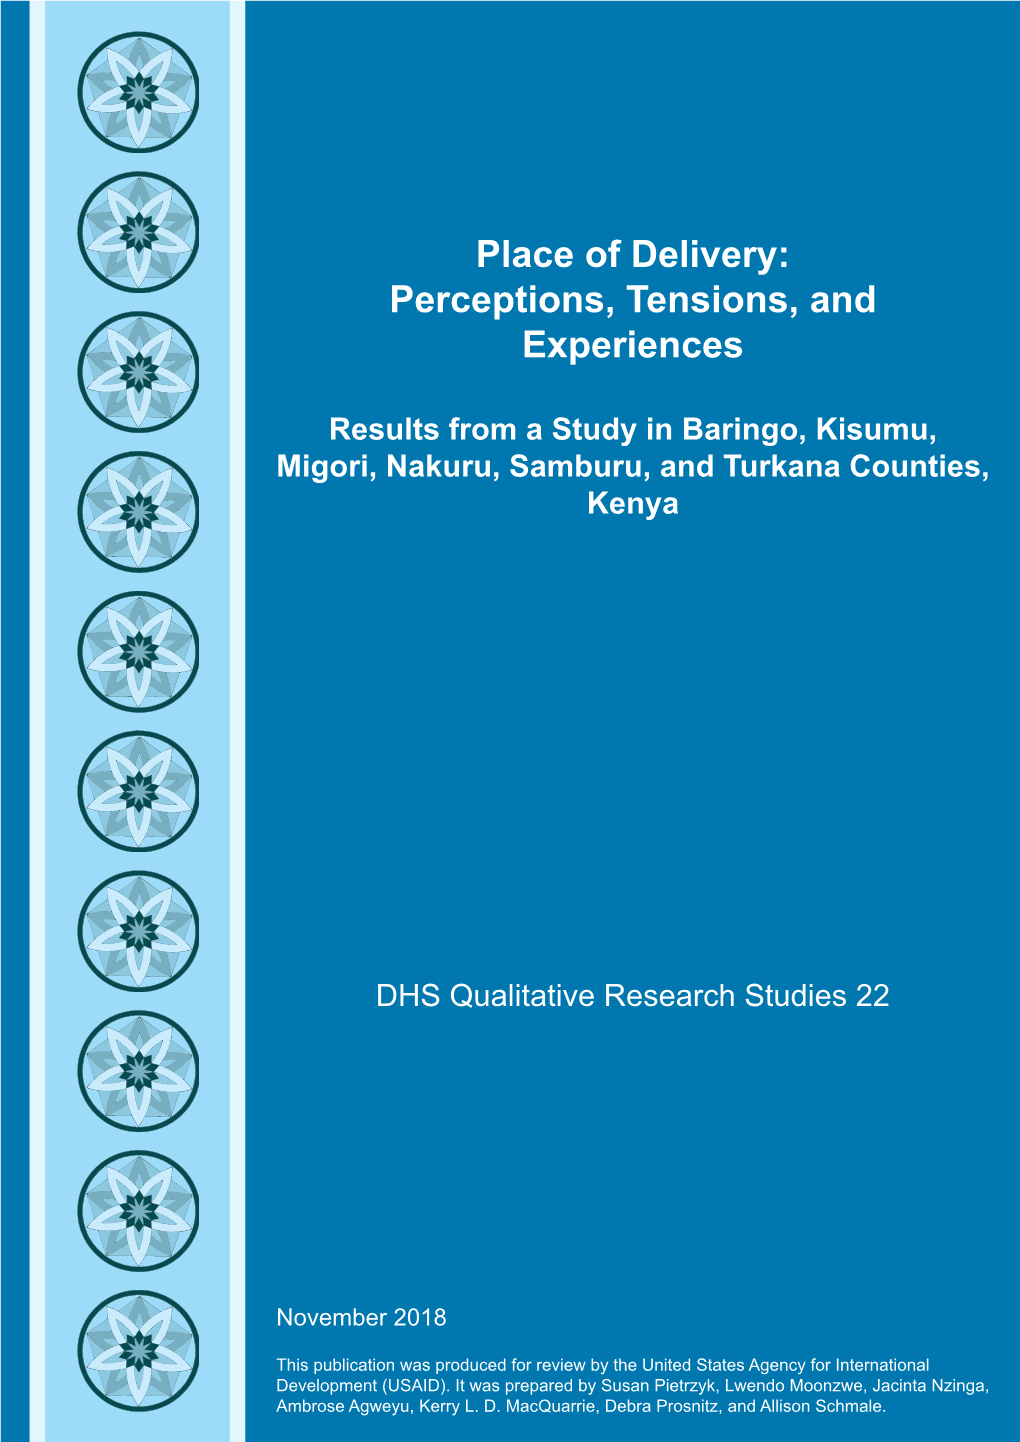 Place of Delivery: Perceptions, Tensions, and Experiences [QRS22]